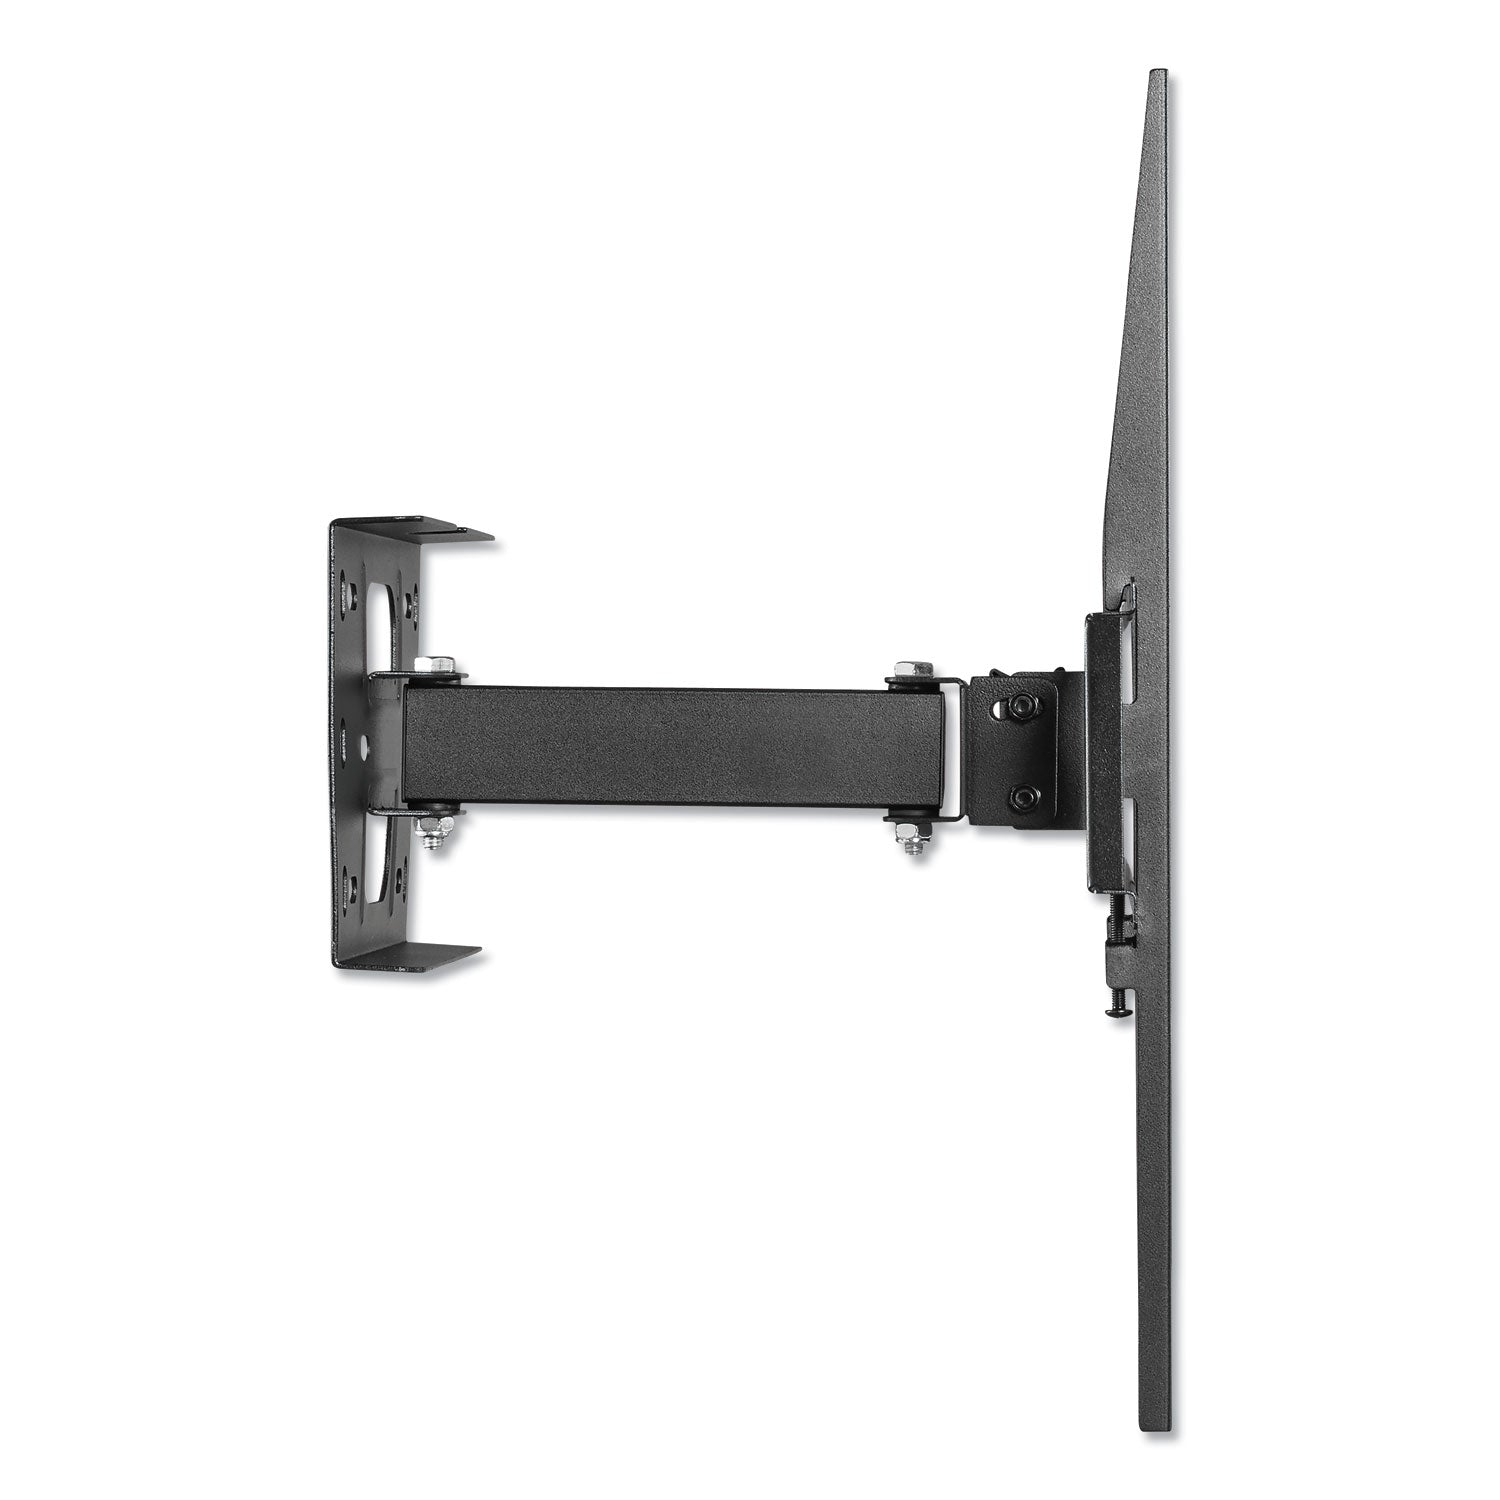 full-motion-tv-wall-mount-for-monitors-32-to-55-171w-x-98d-x-169h_ivr56100 - 3